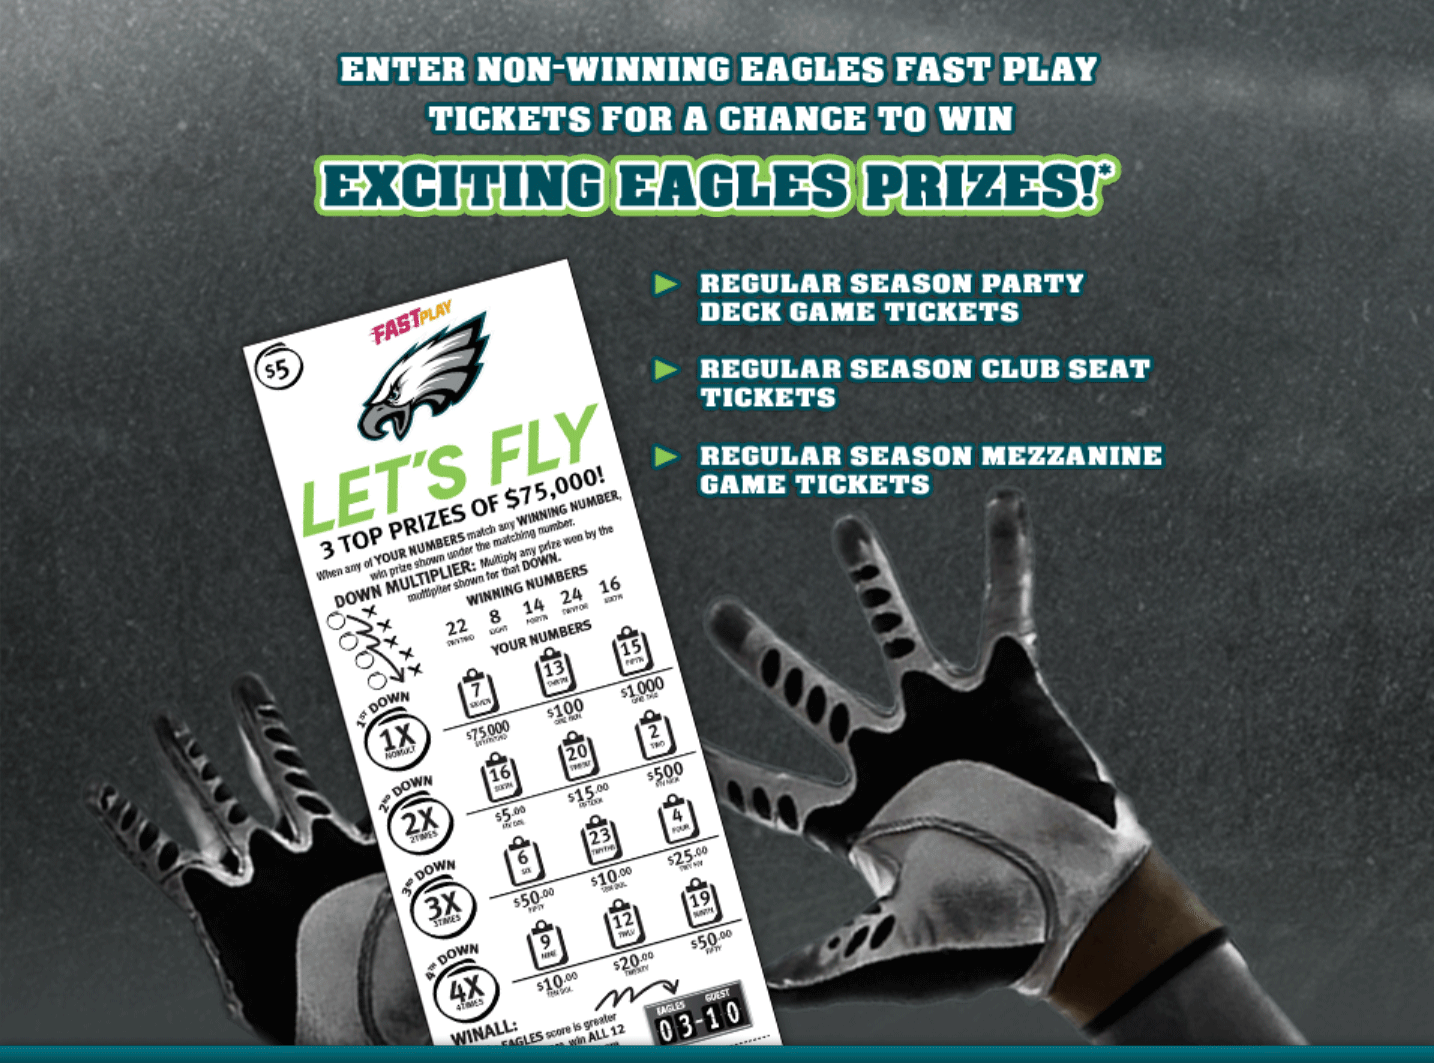 Enter non-winning Eagles Fast Play tickets for a chance to win exciting Eagles prizes!